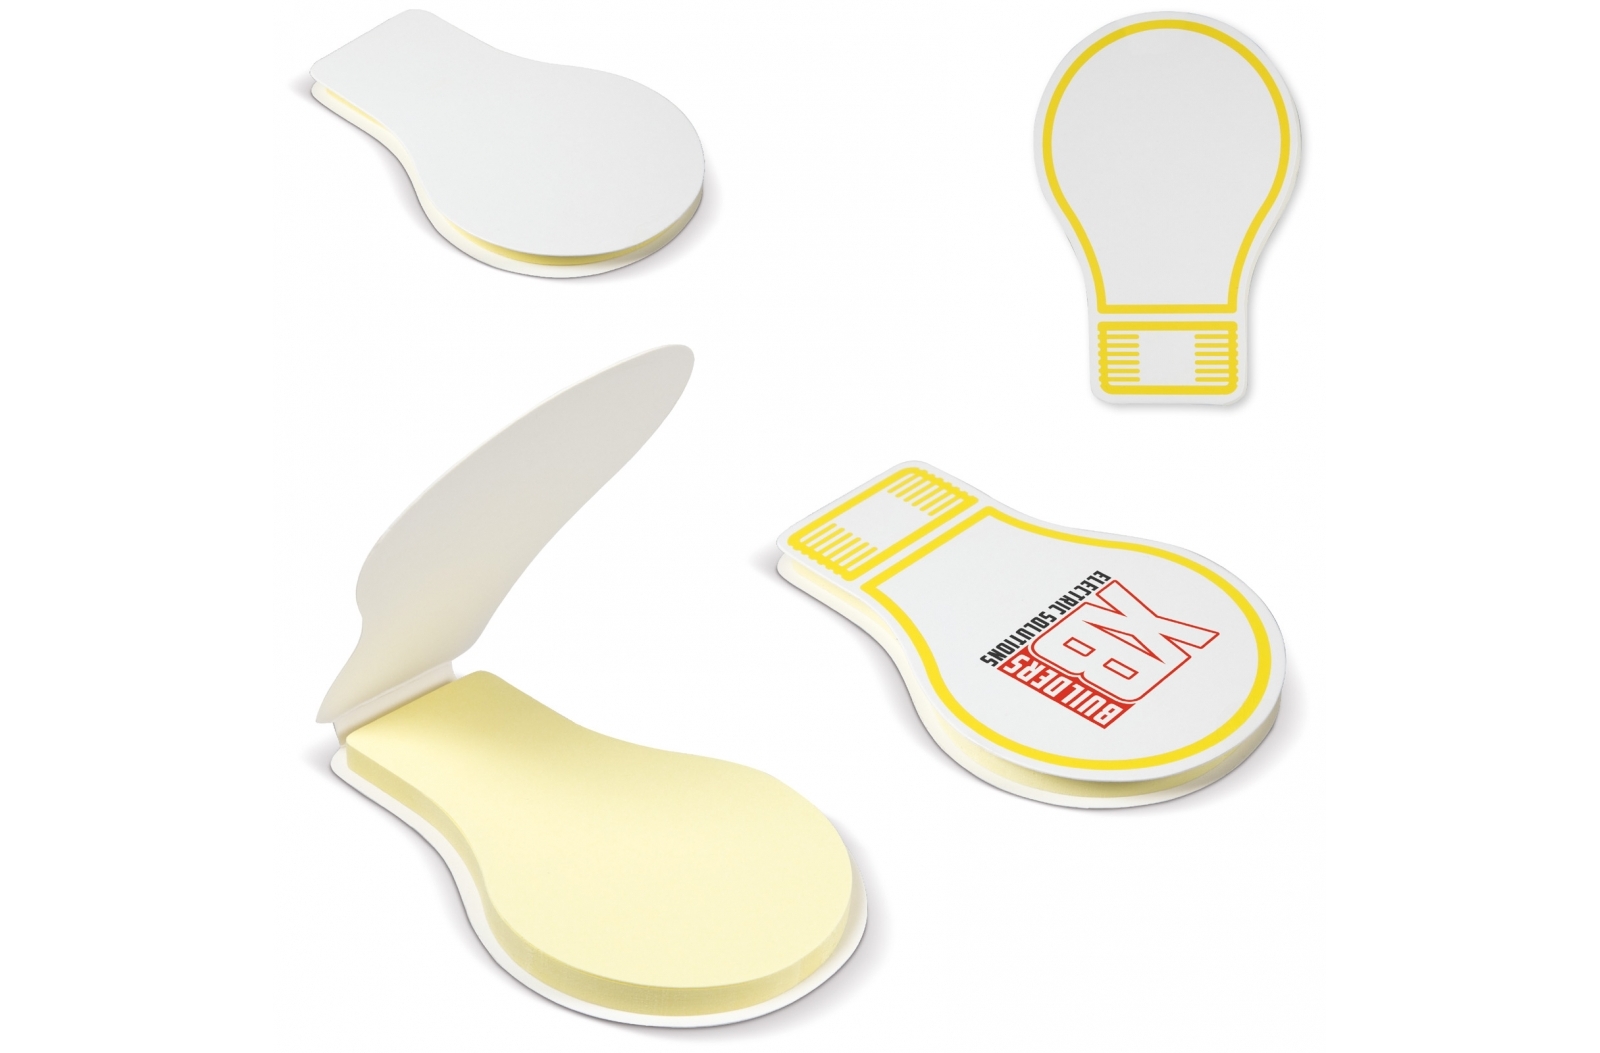 Adhesive Notes in Light Bulb Shape - Trottiscliffe